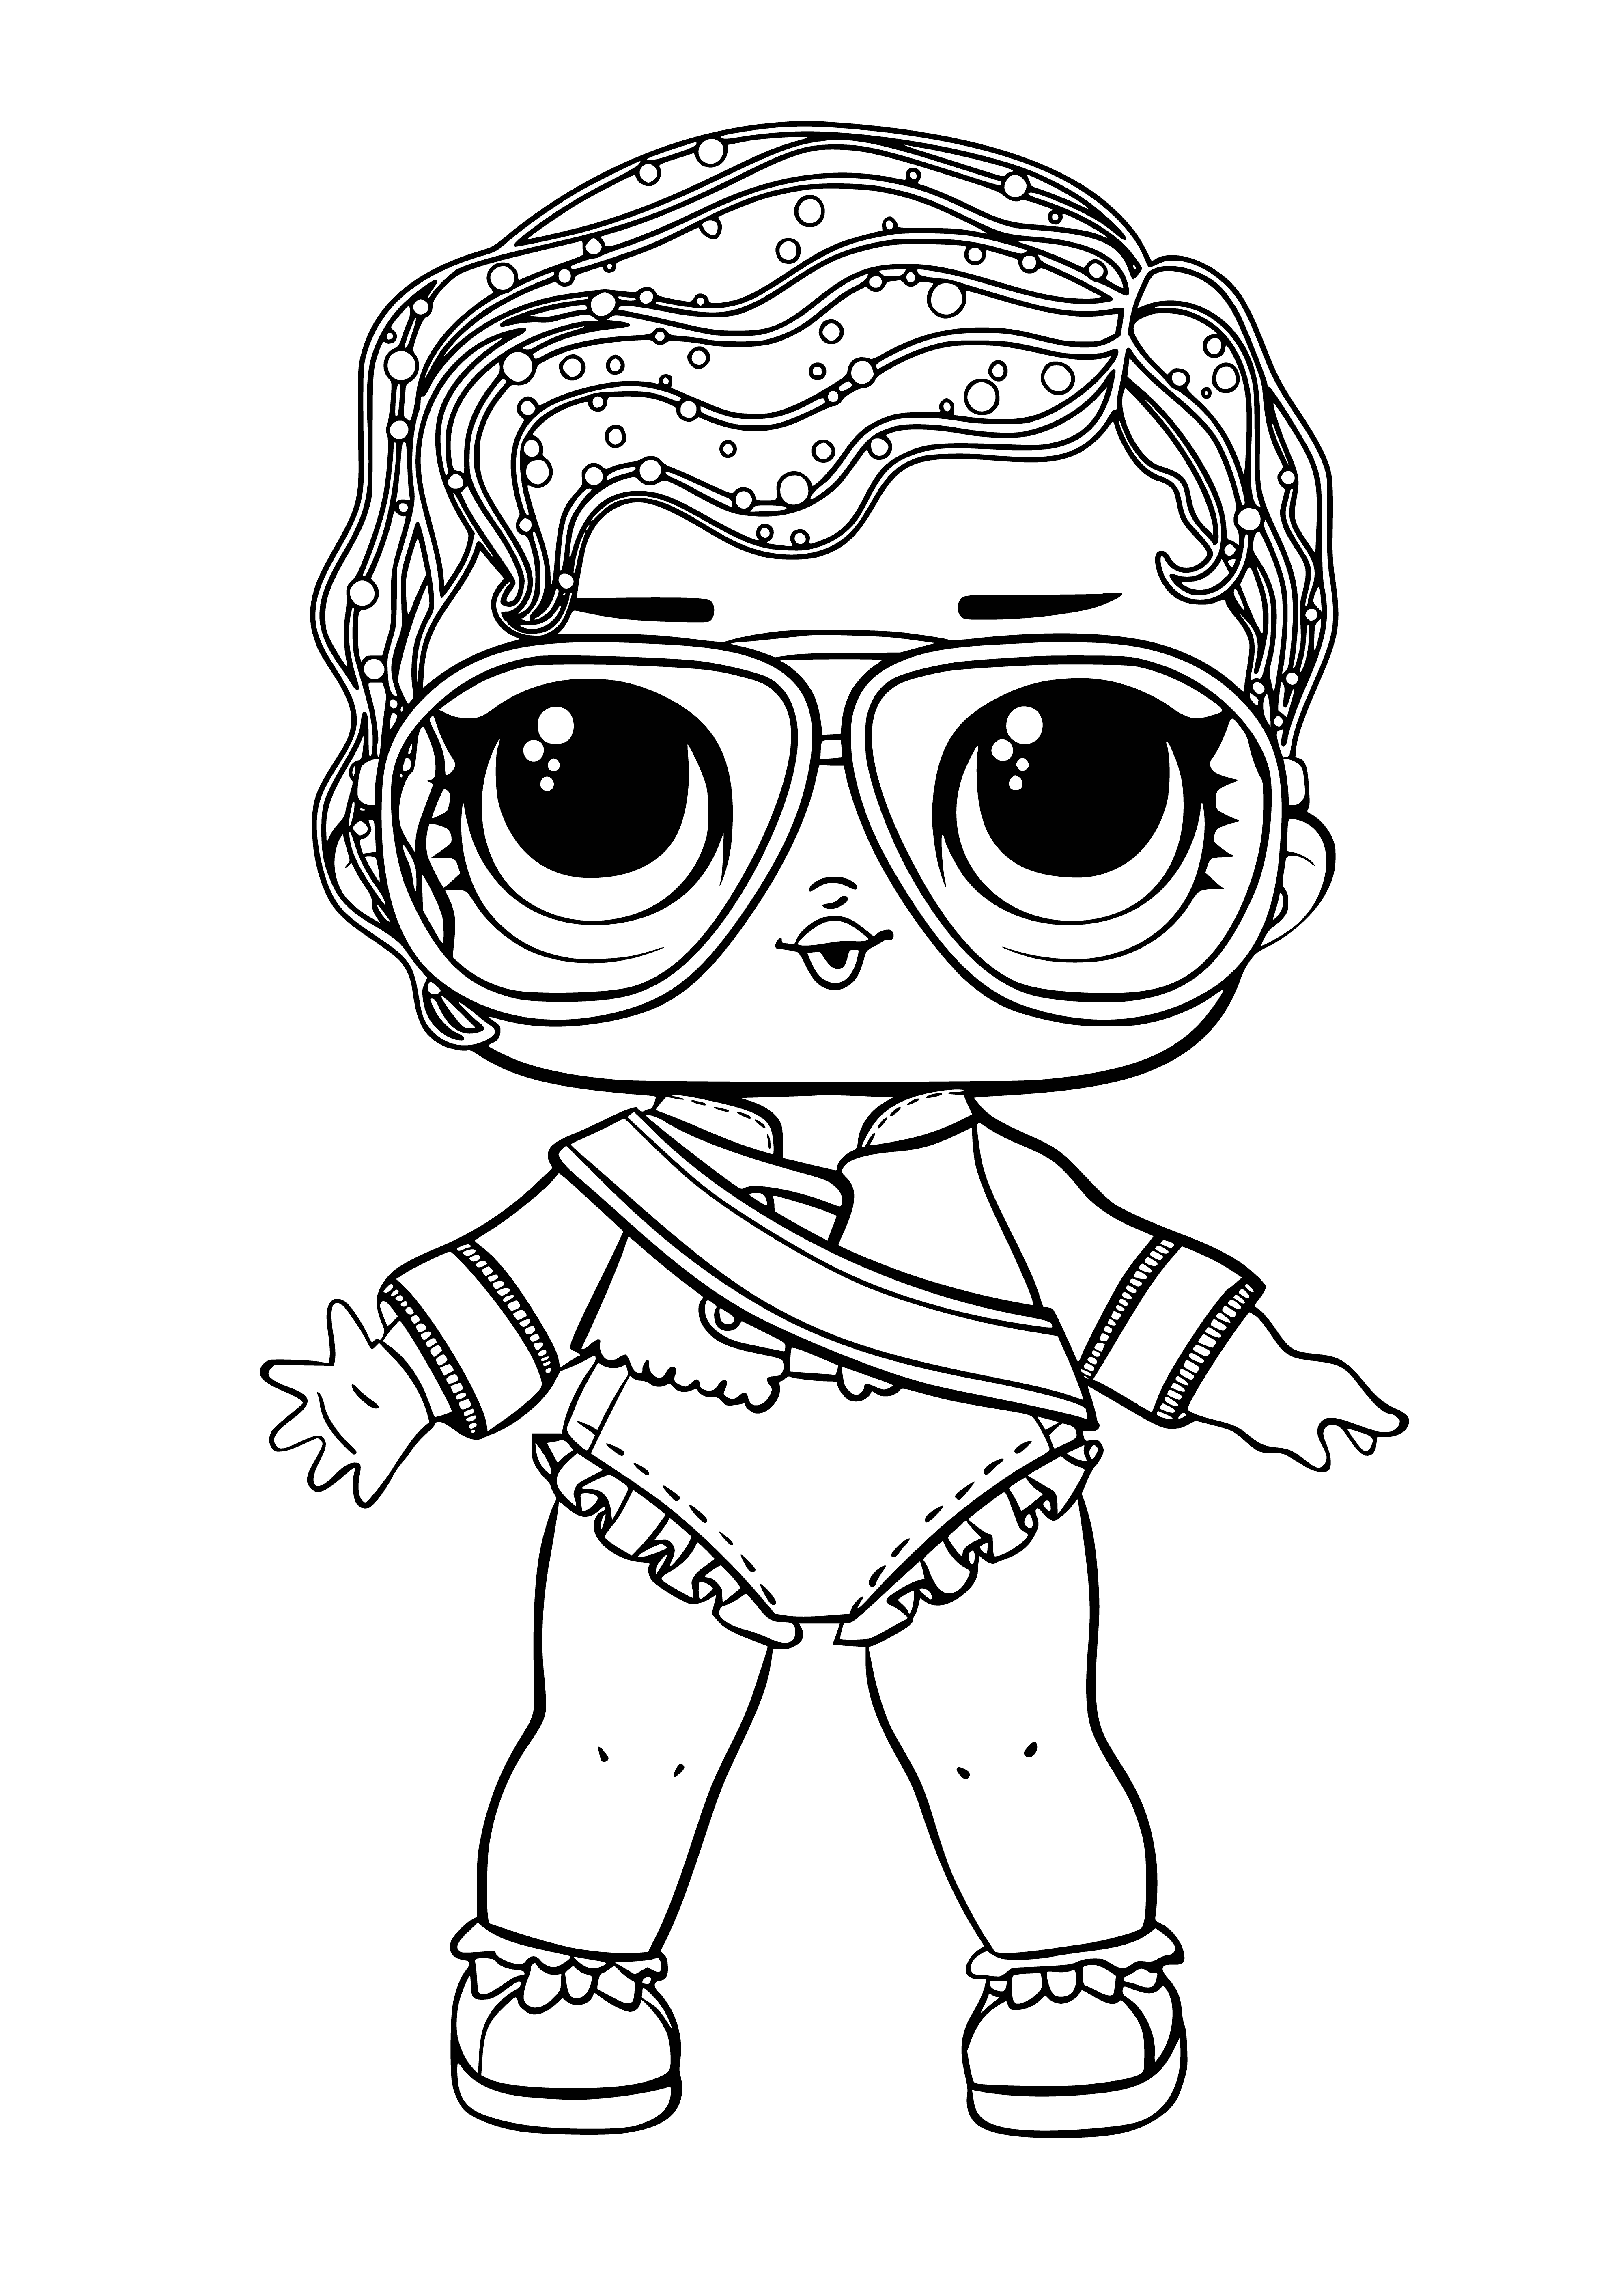 LOL Shimone Queen (Michael Jackson) coloring page